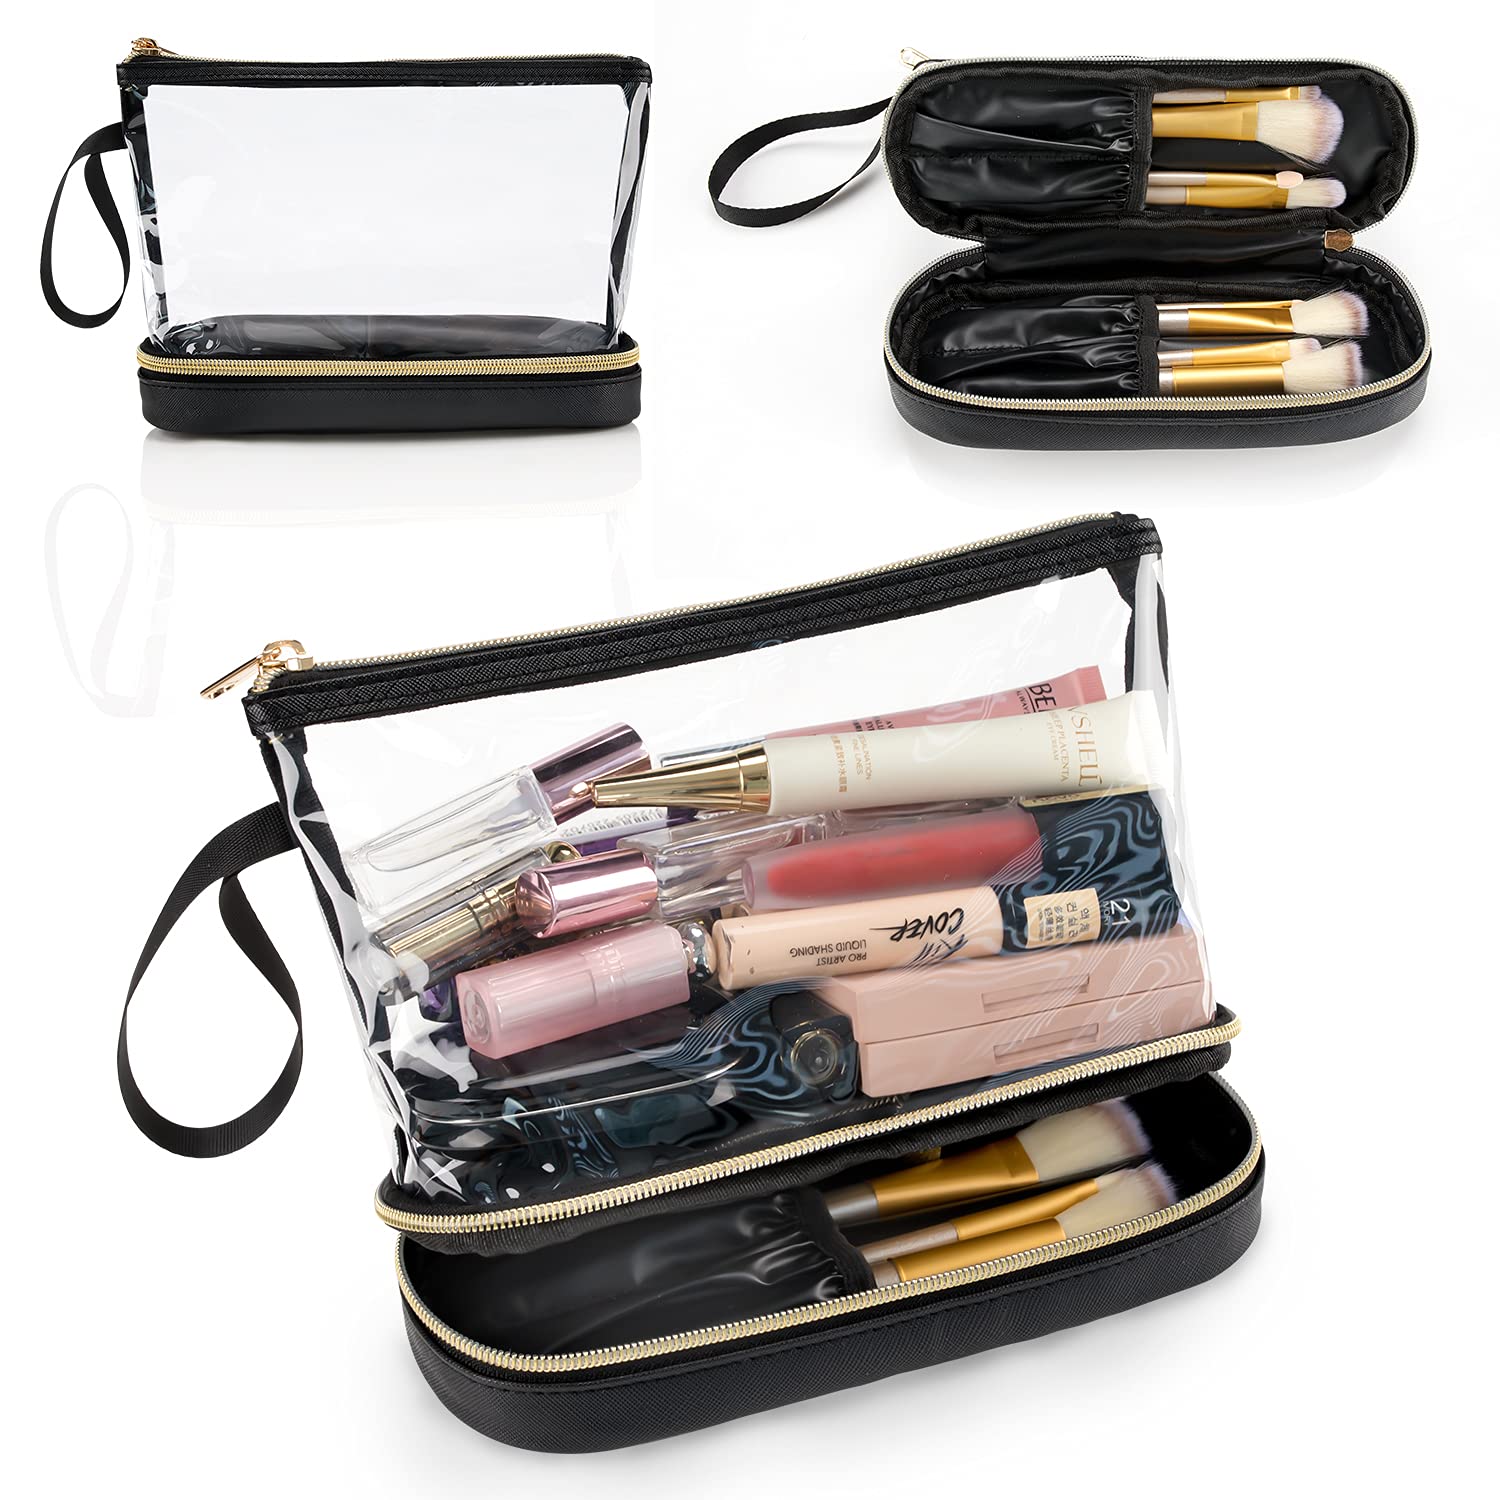 PVC Makeup Bags - The One Packing Solution